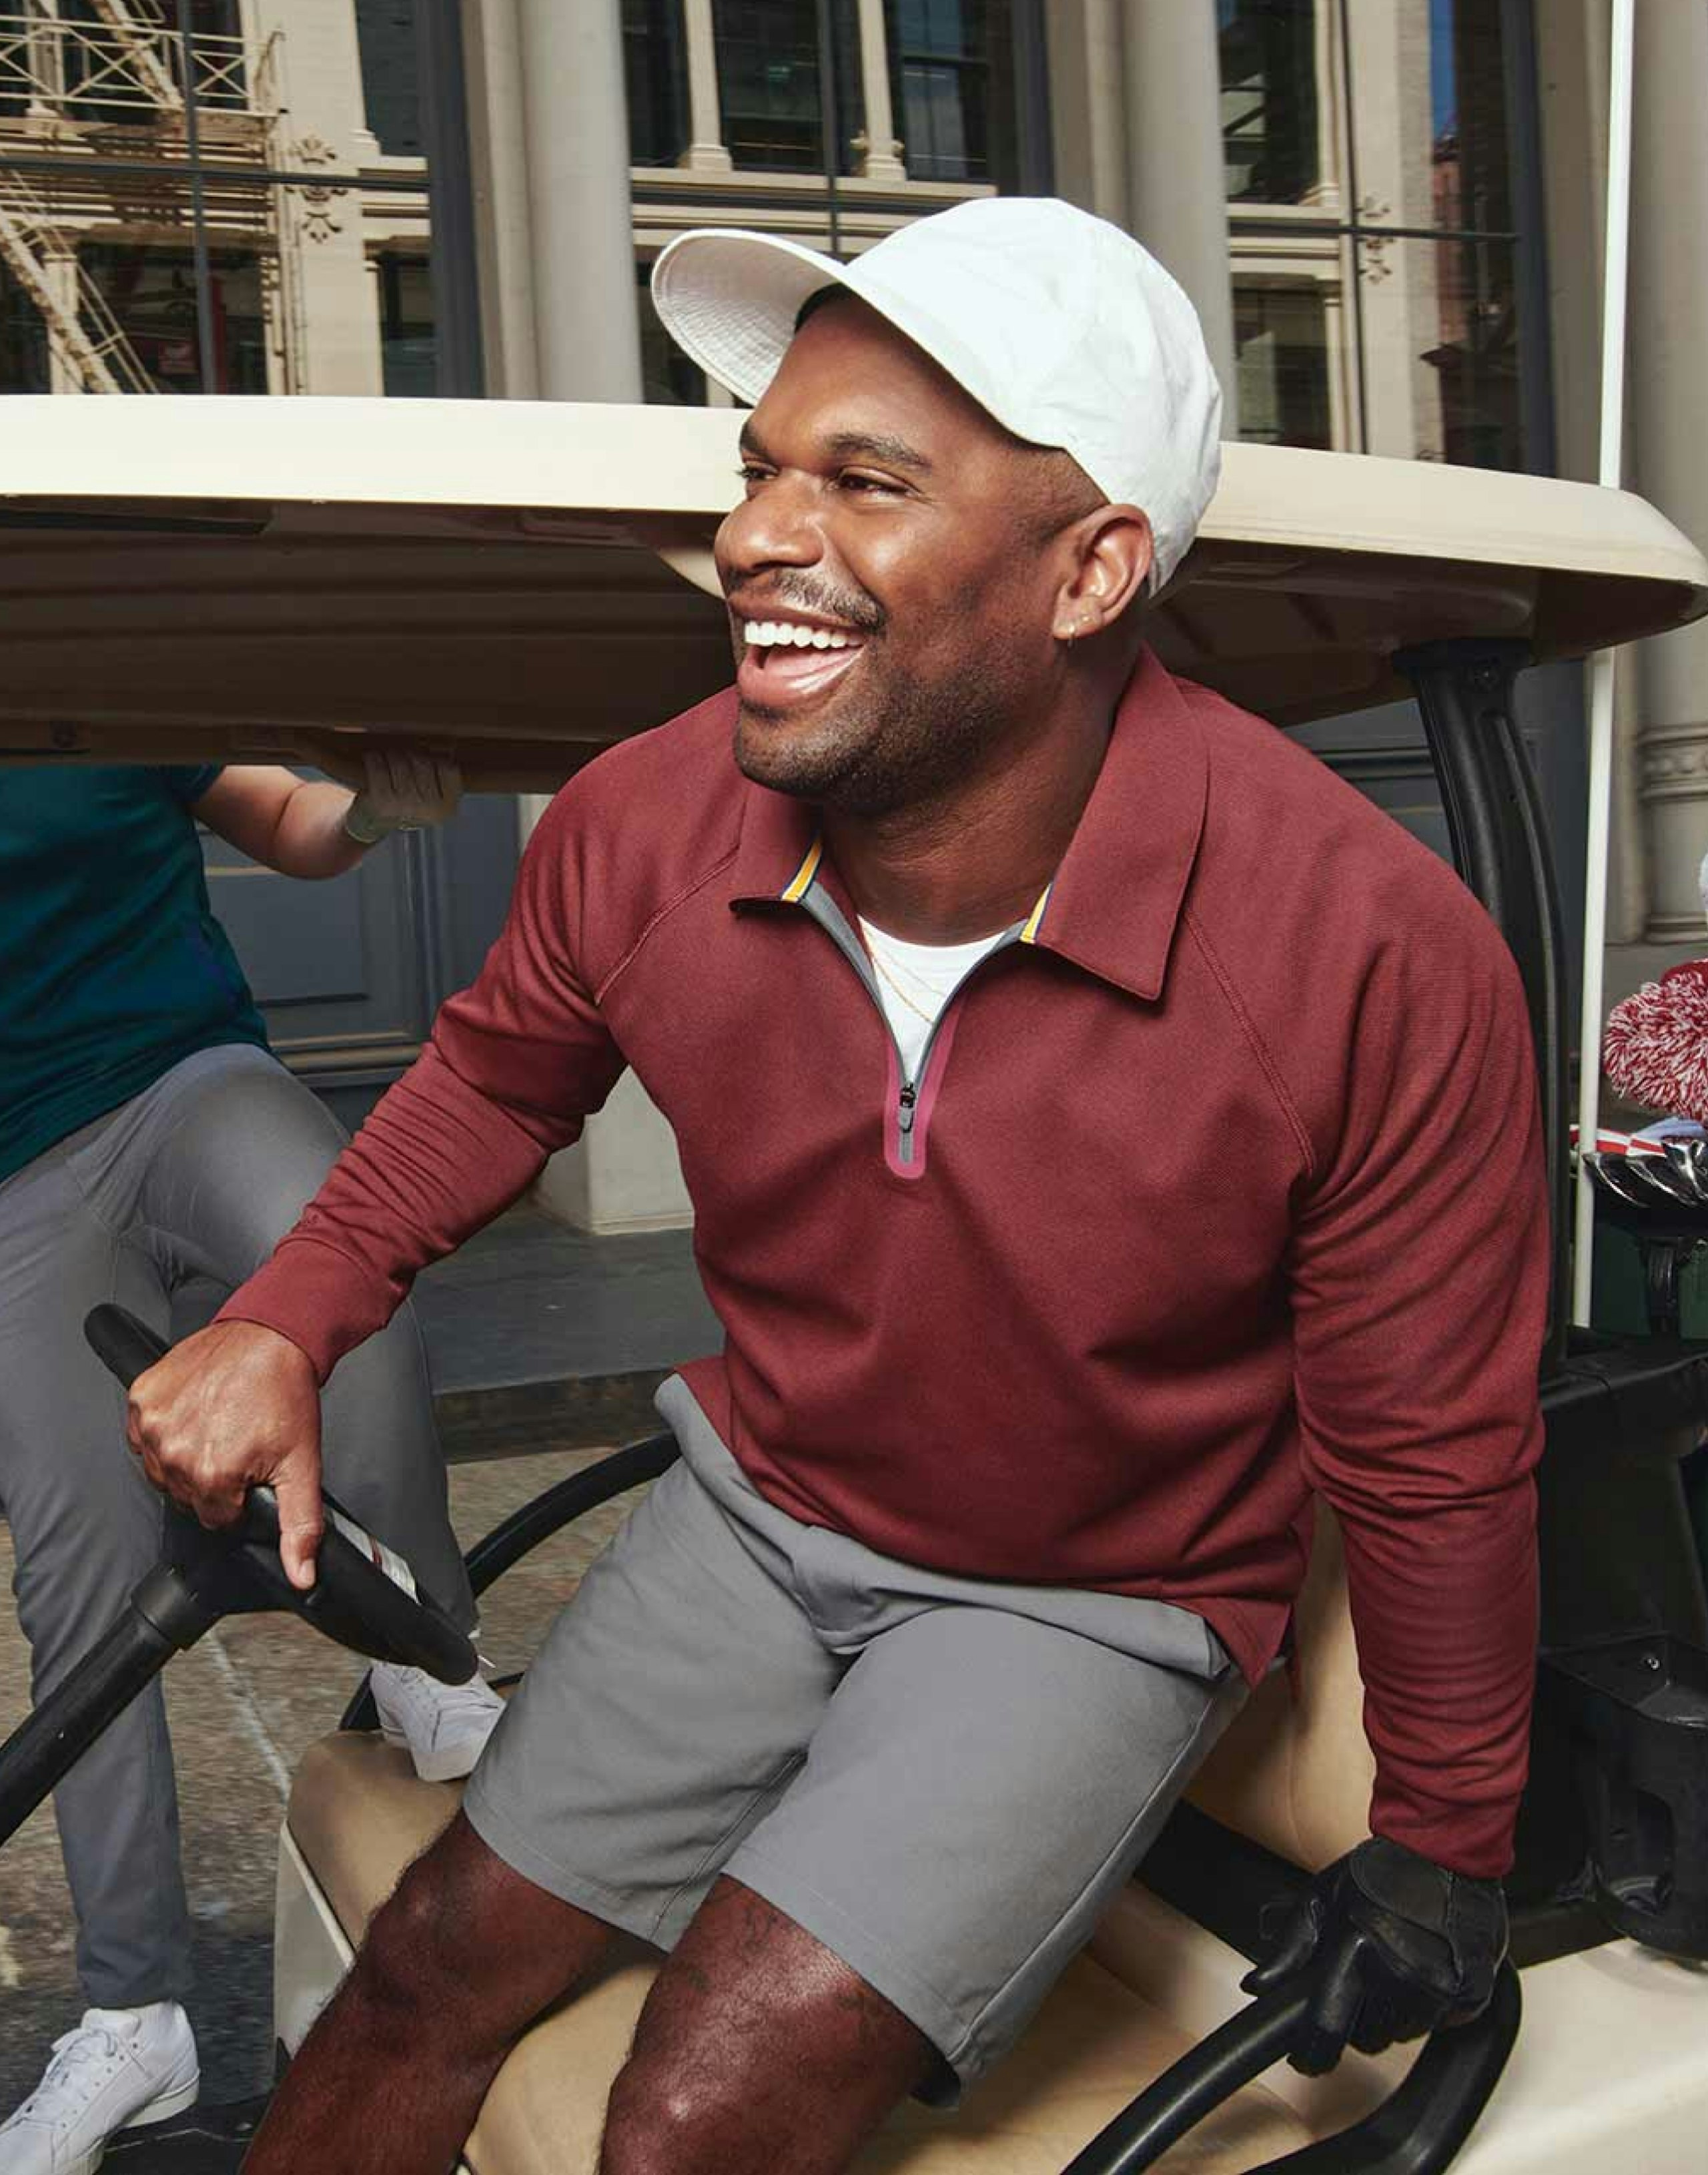 Golf Player smiling getting out of a golf cart with a hand on the wheel. 